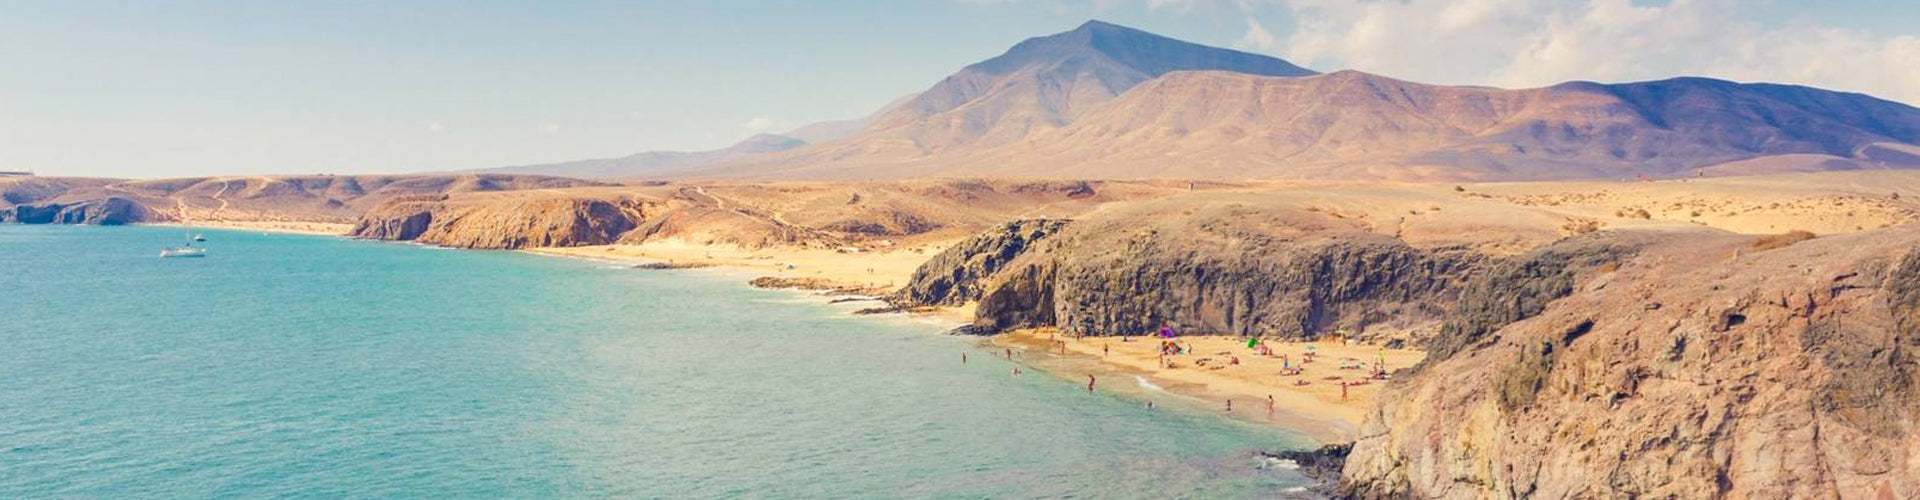 The Island of Lanzarote